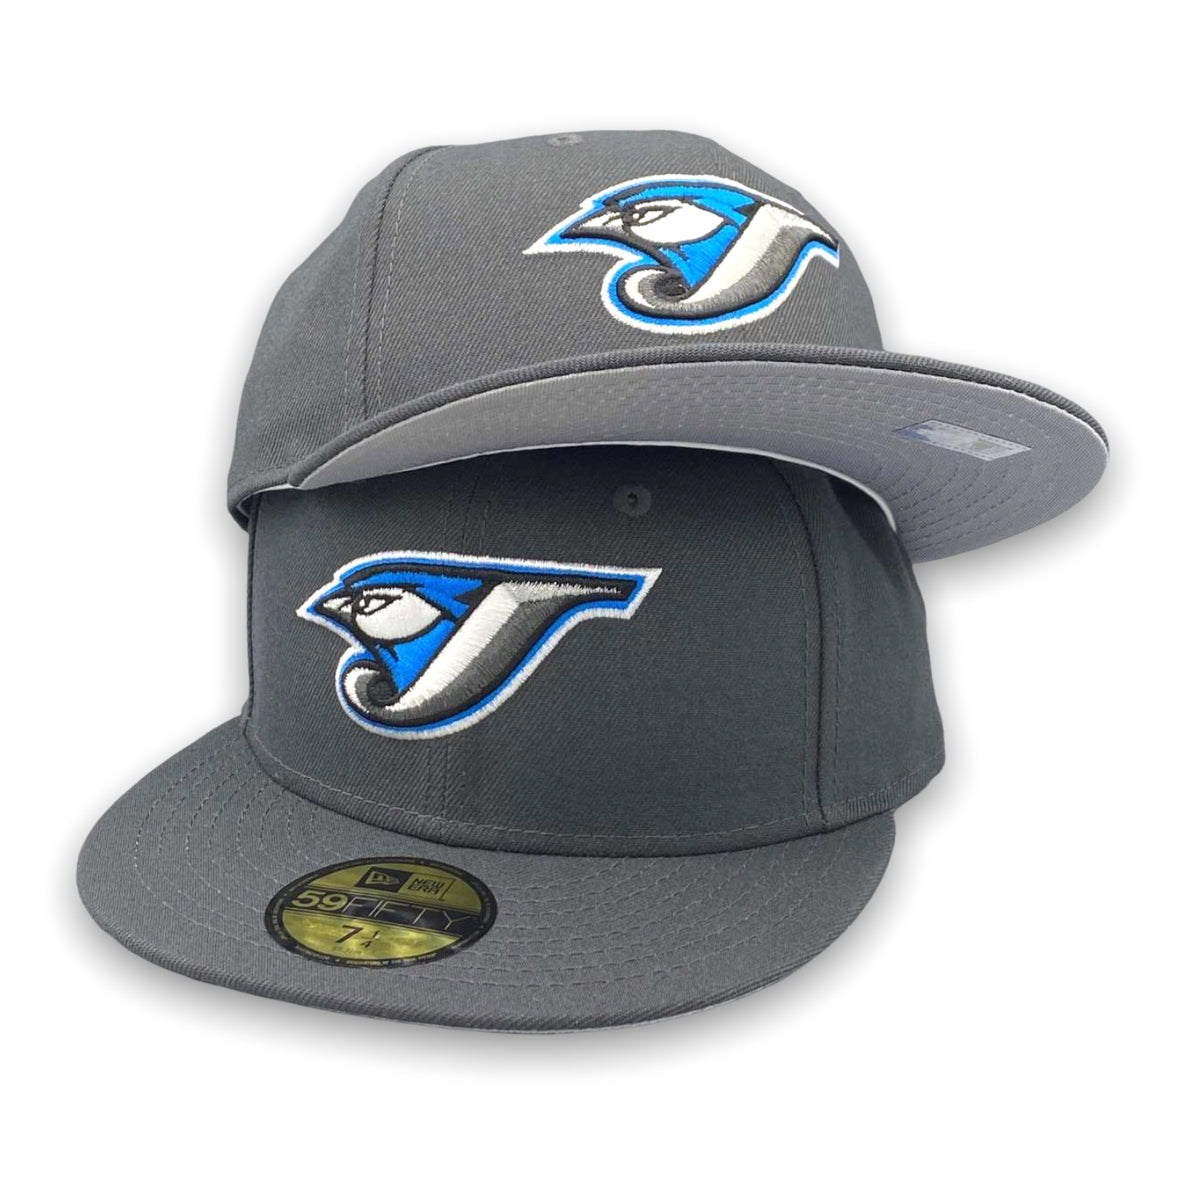 Toronto Blue Jays Fitted New Era 59Fifty New White Logo Cap Hat Brown – THE  4TH QUARTER